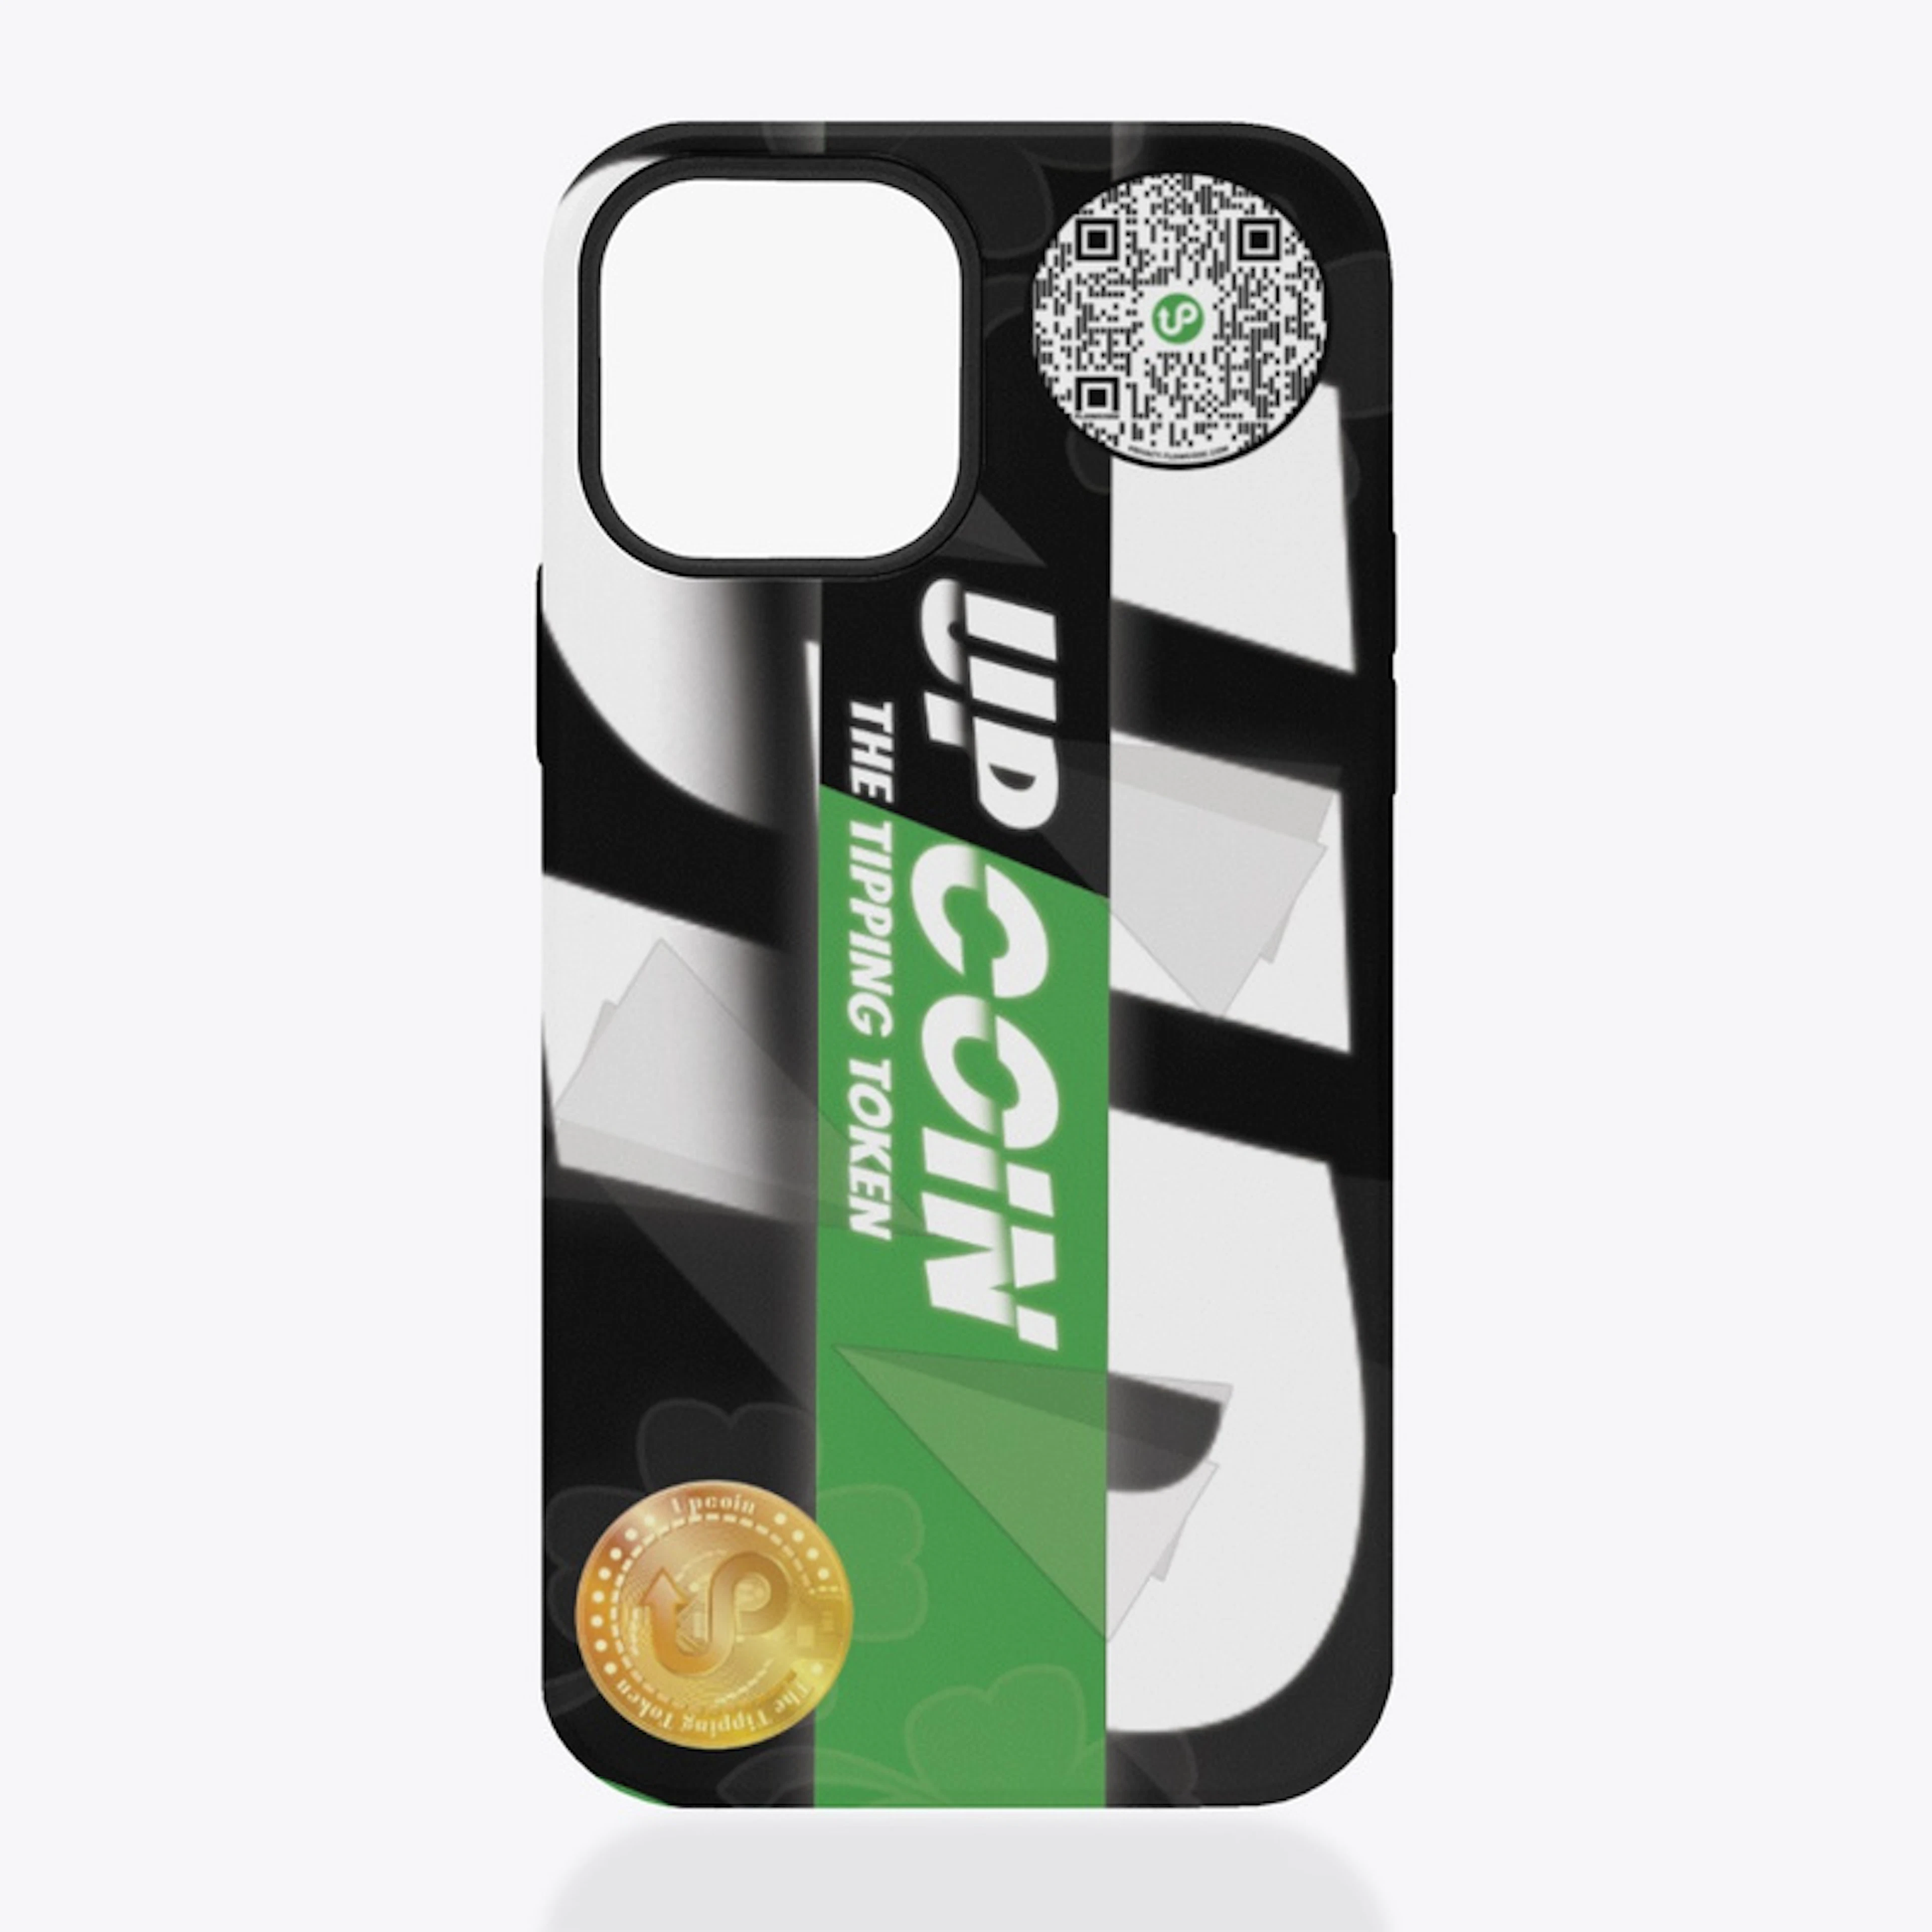 The Lucky Uphone Case!